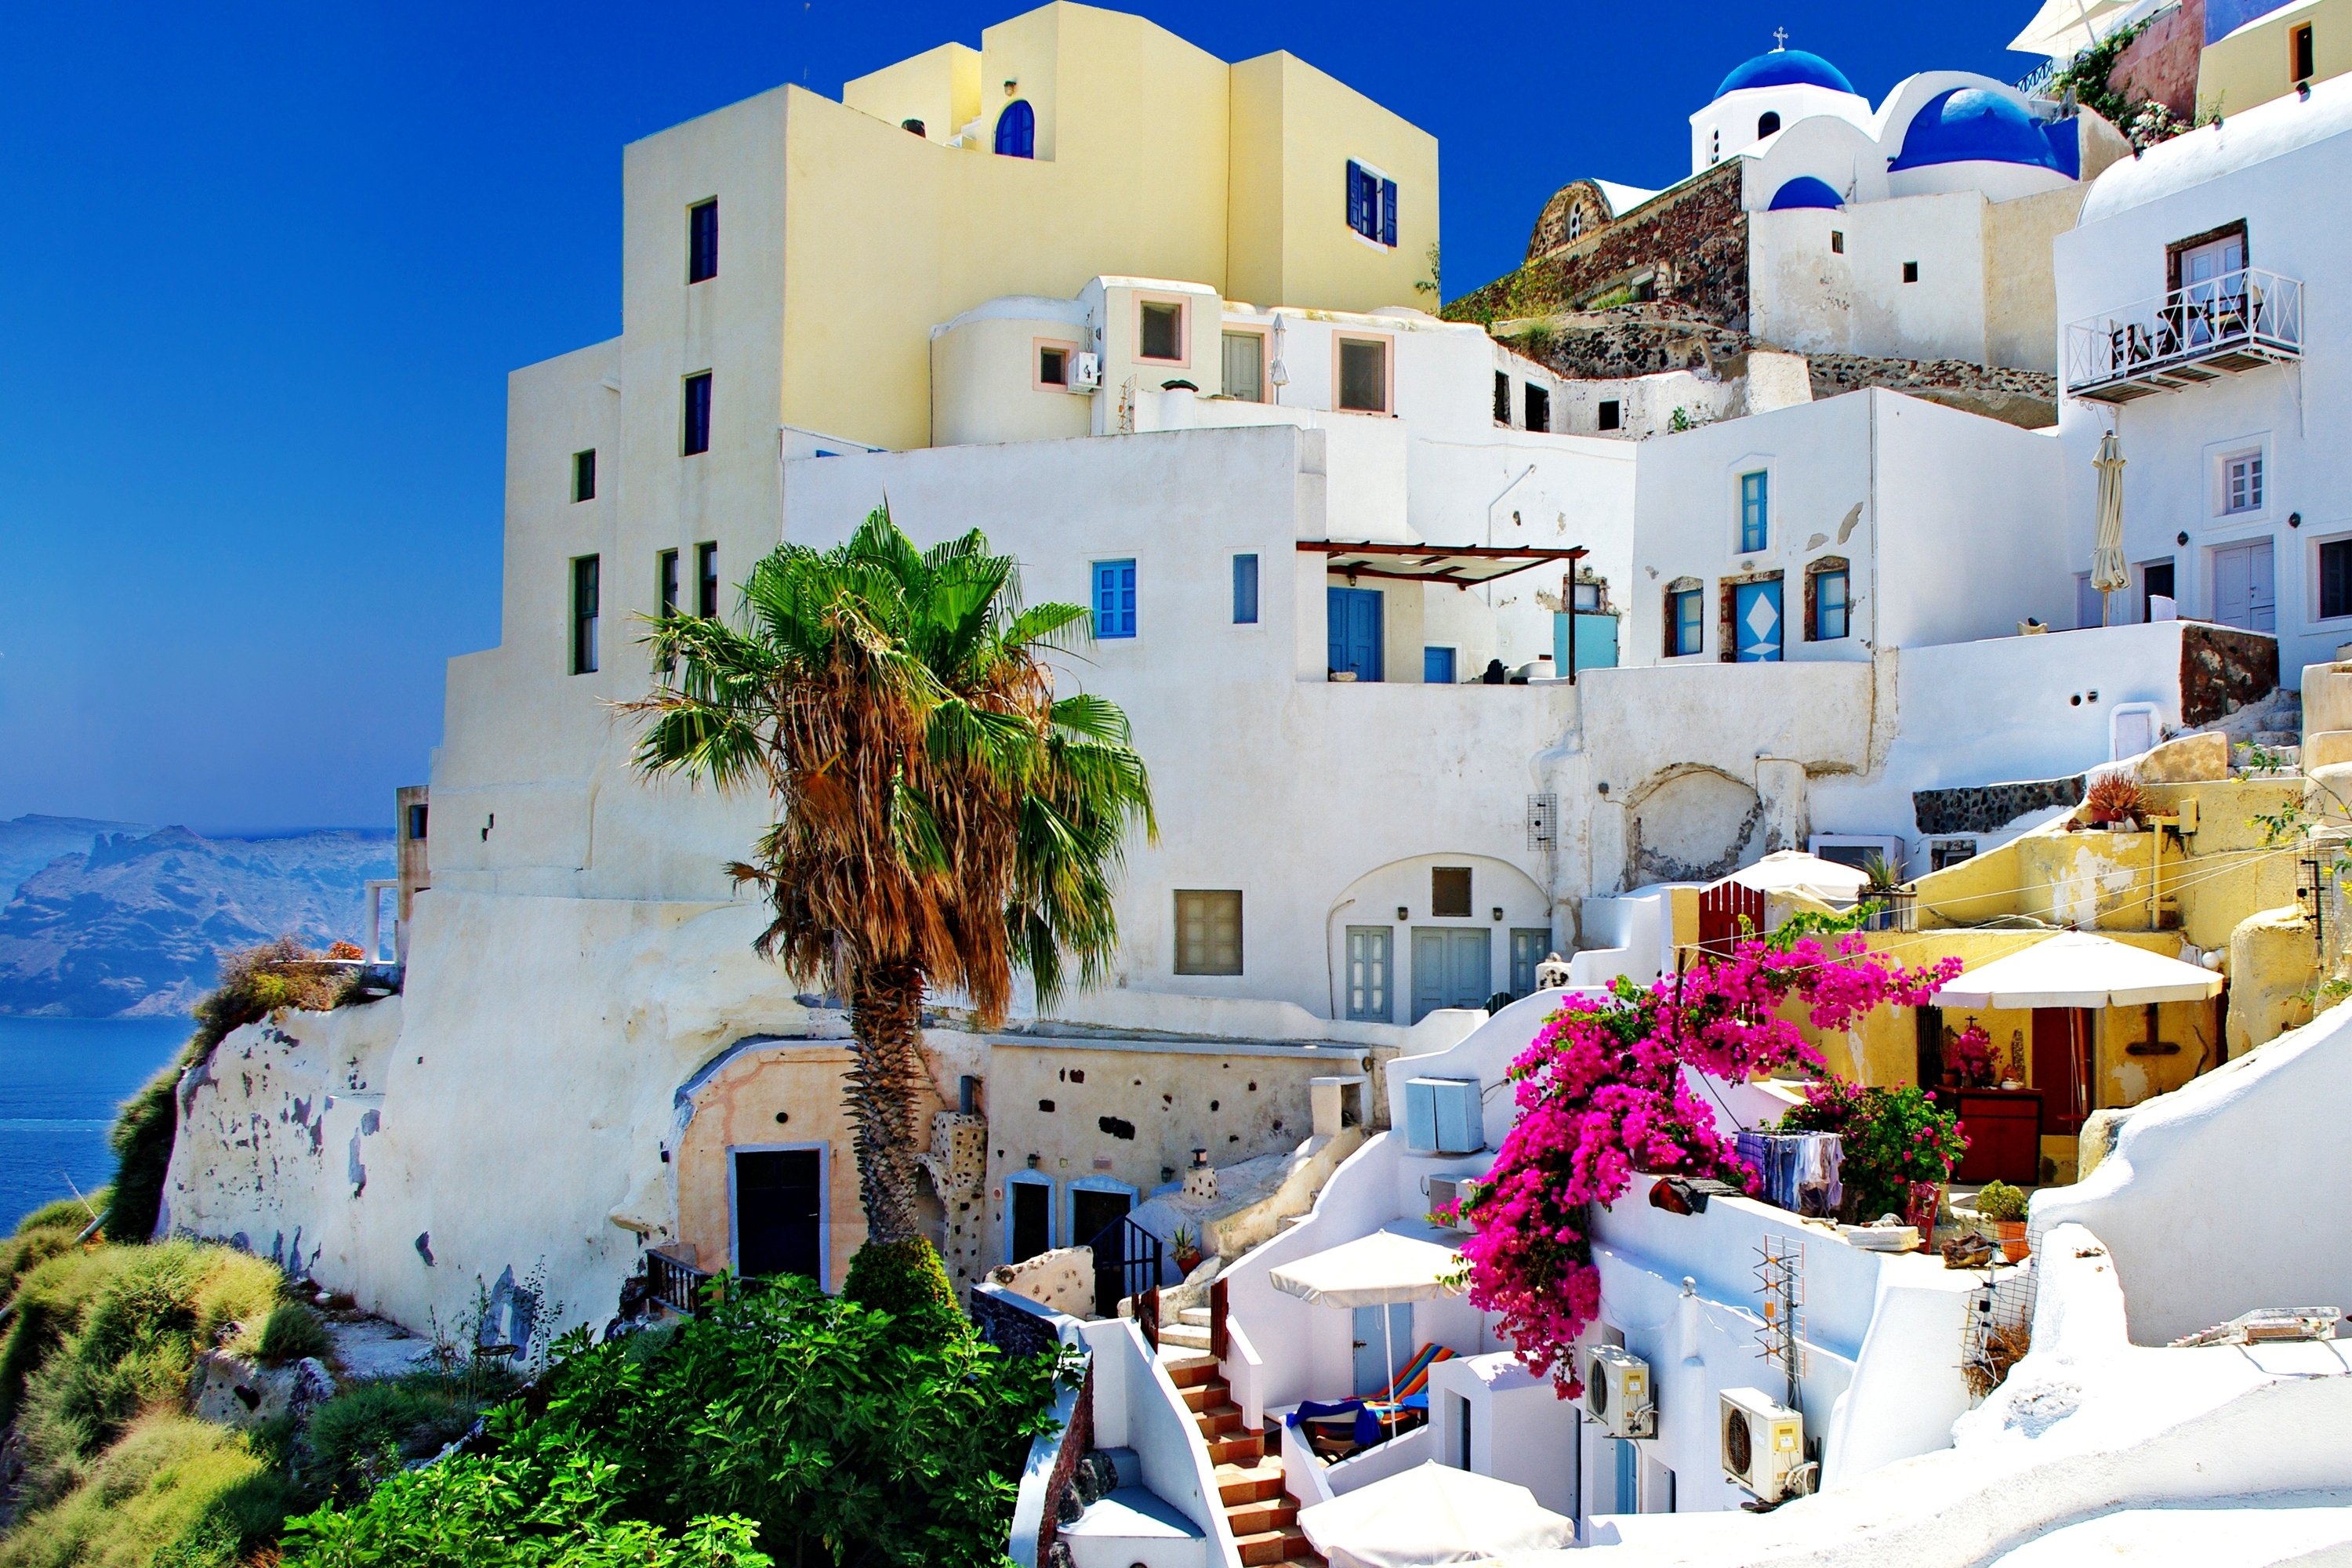 santorini, architecture, man made, town, building, greece, towns